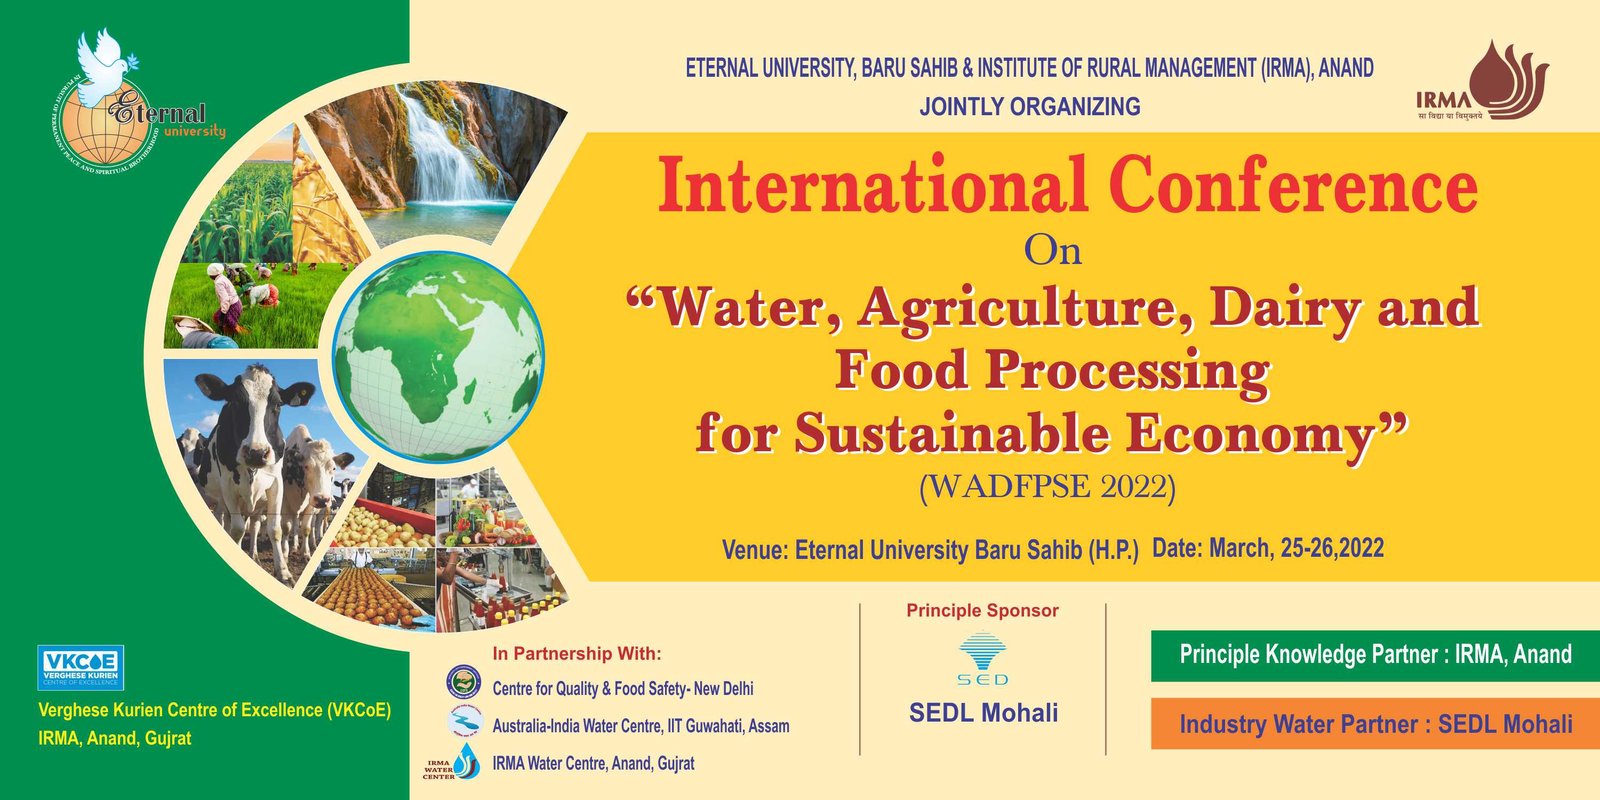 Eternal University International Conference on “Water, Agriculture